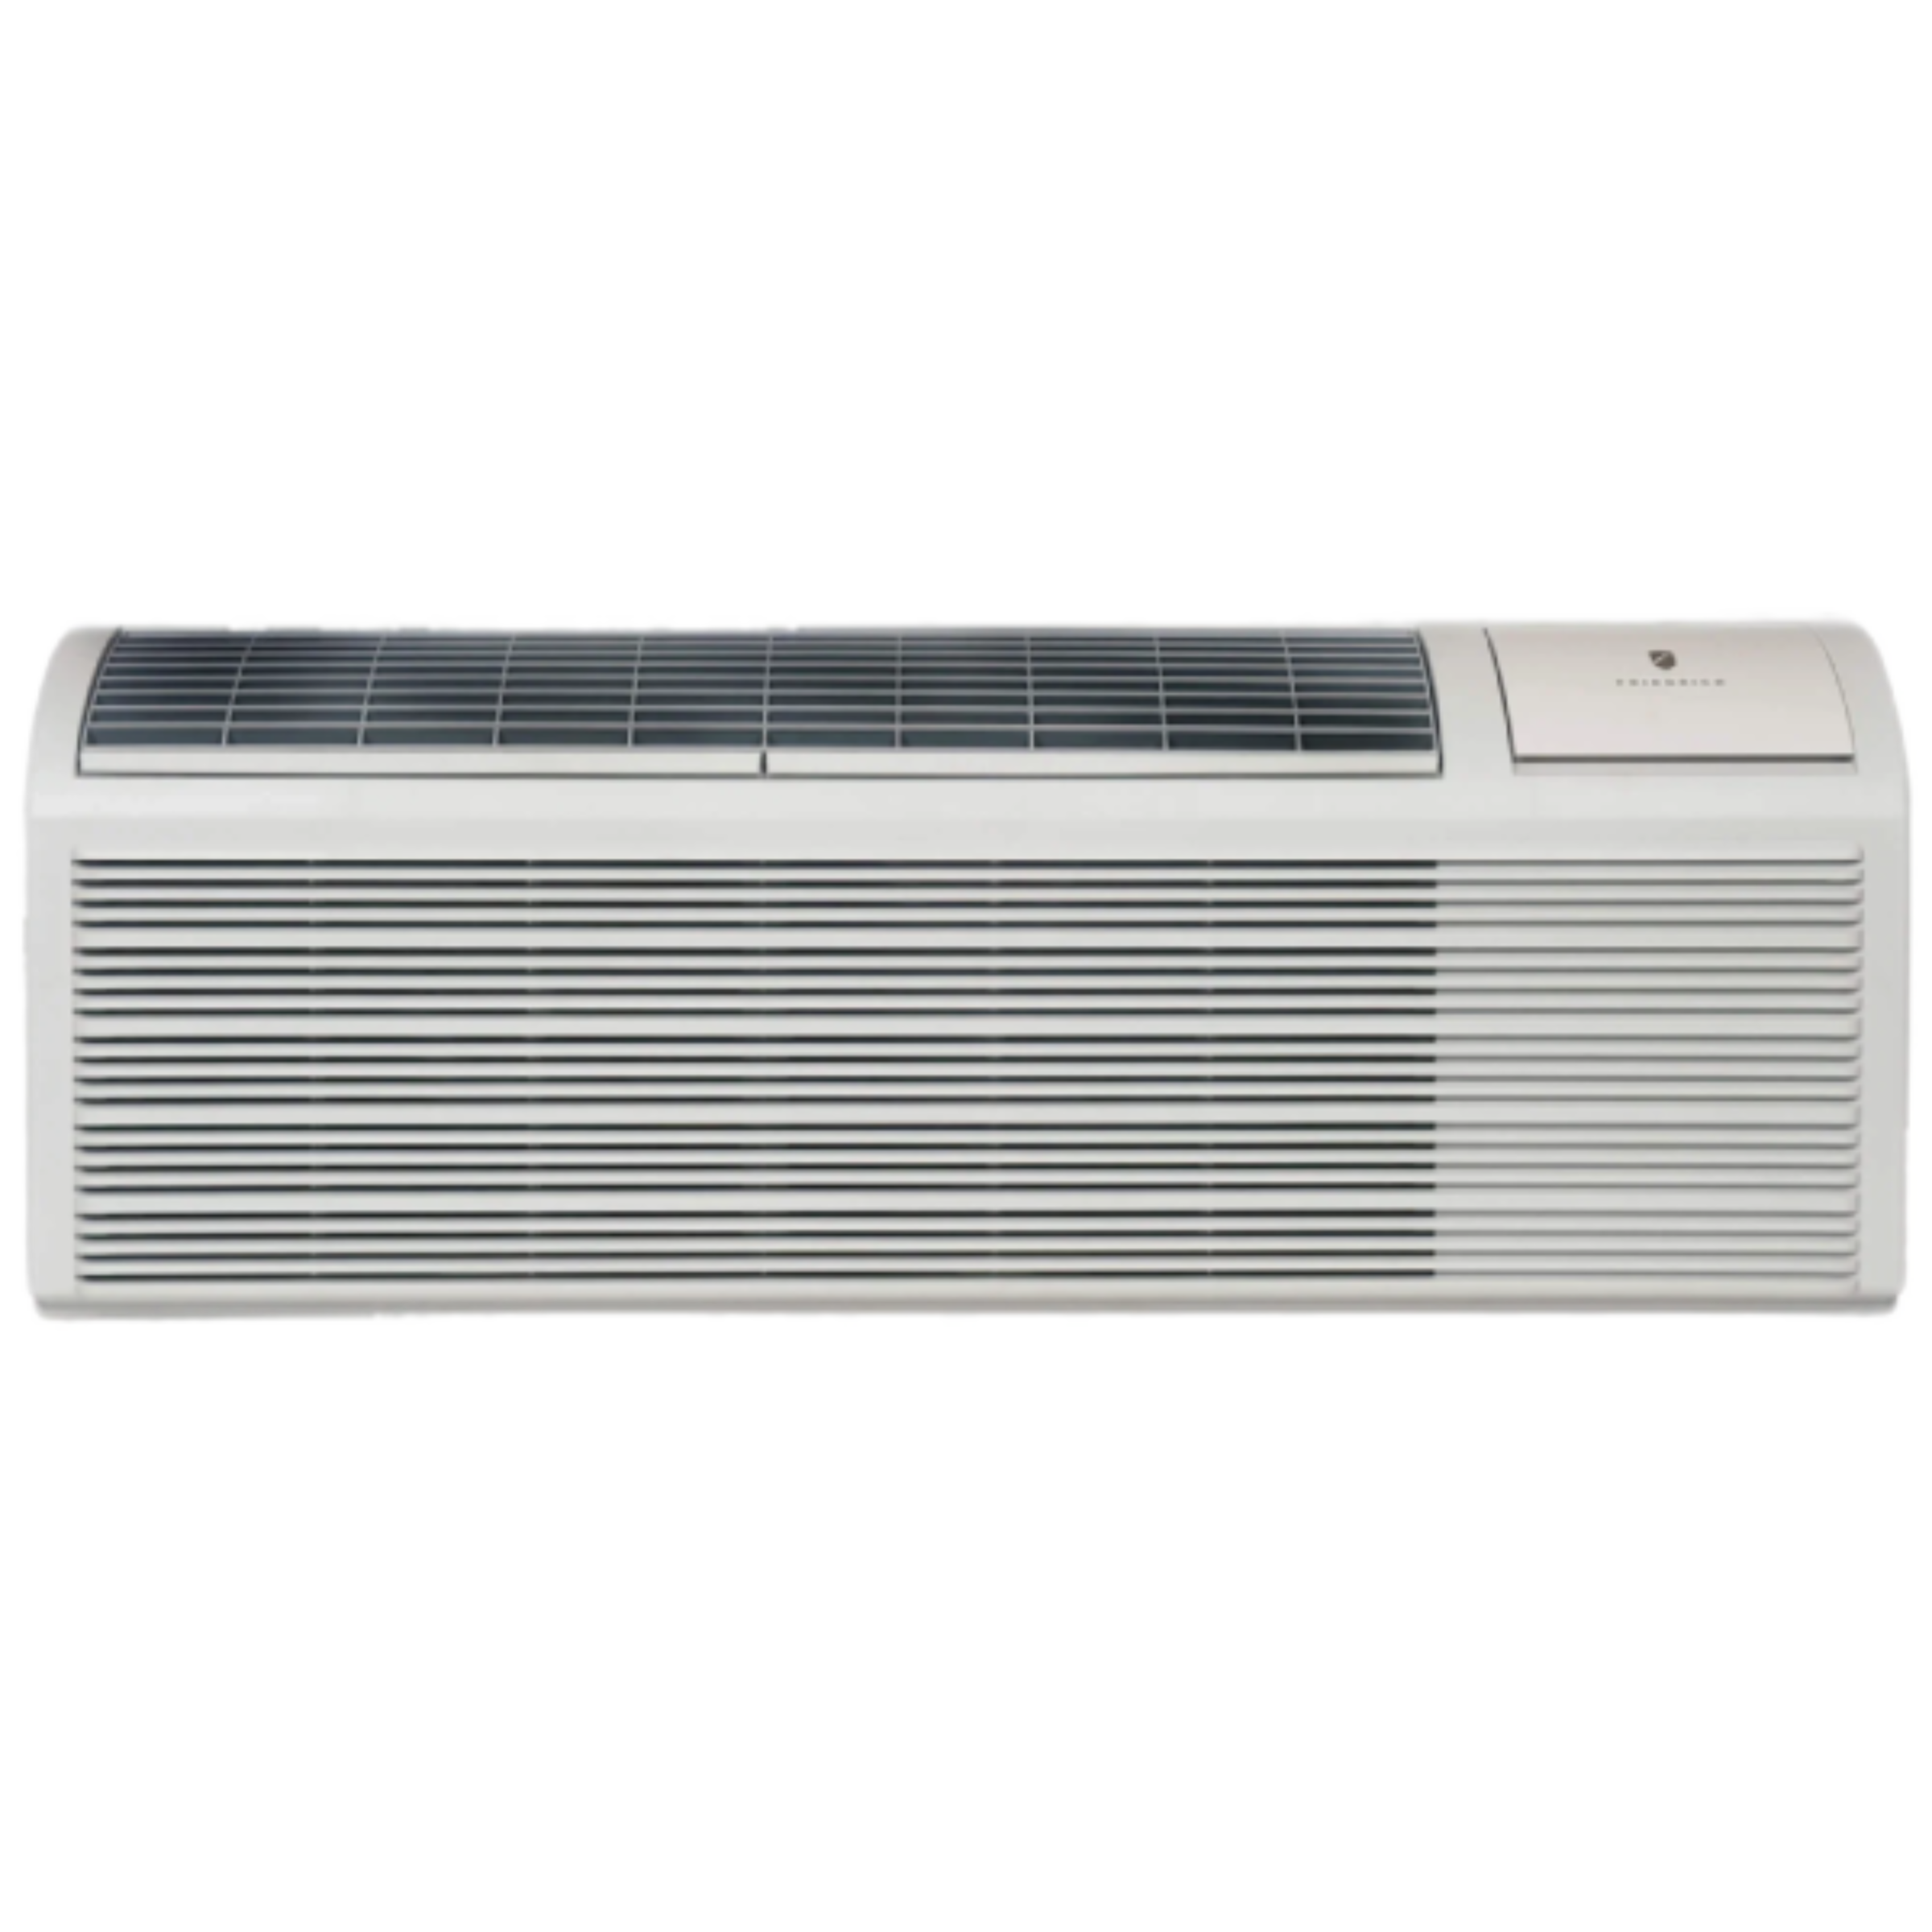 Friedrich ZoneAire Select Packaged Terminal Air Conditioner with Electric Heat Model PZE09R3SB, 11.5 EER, 265 V, 400 CFM, 9200 BTU